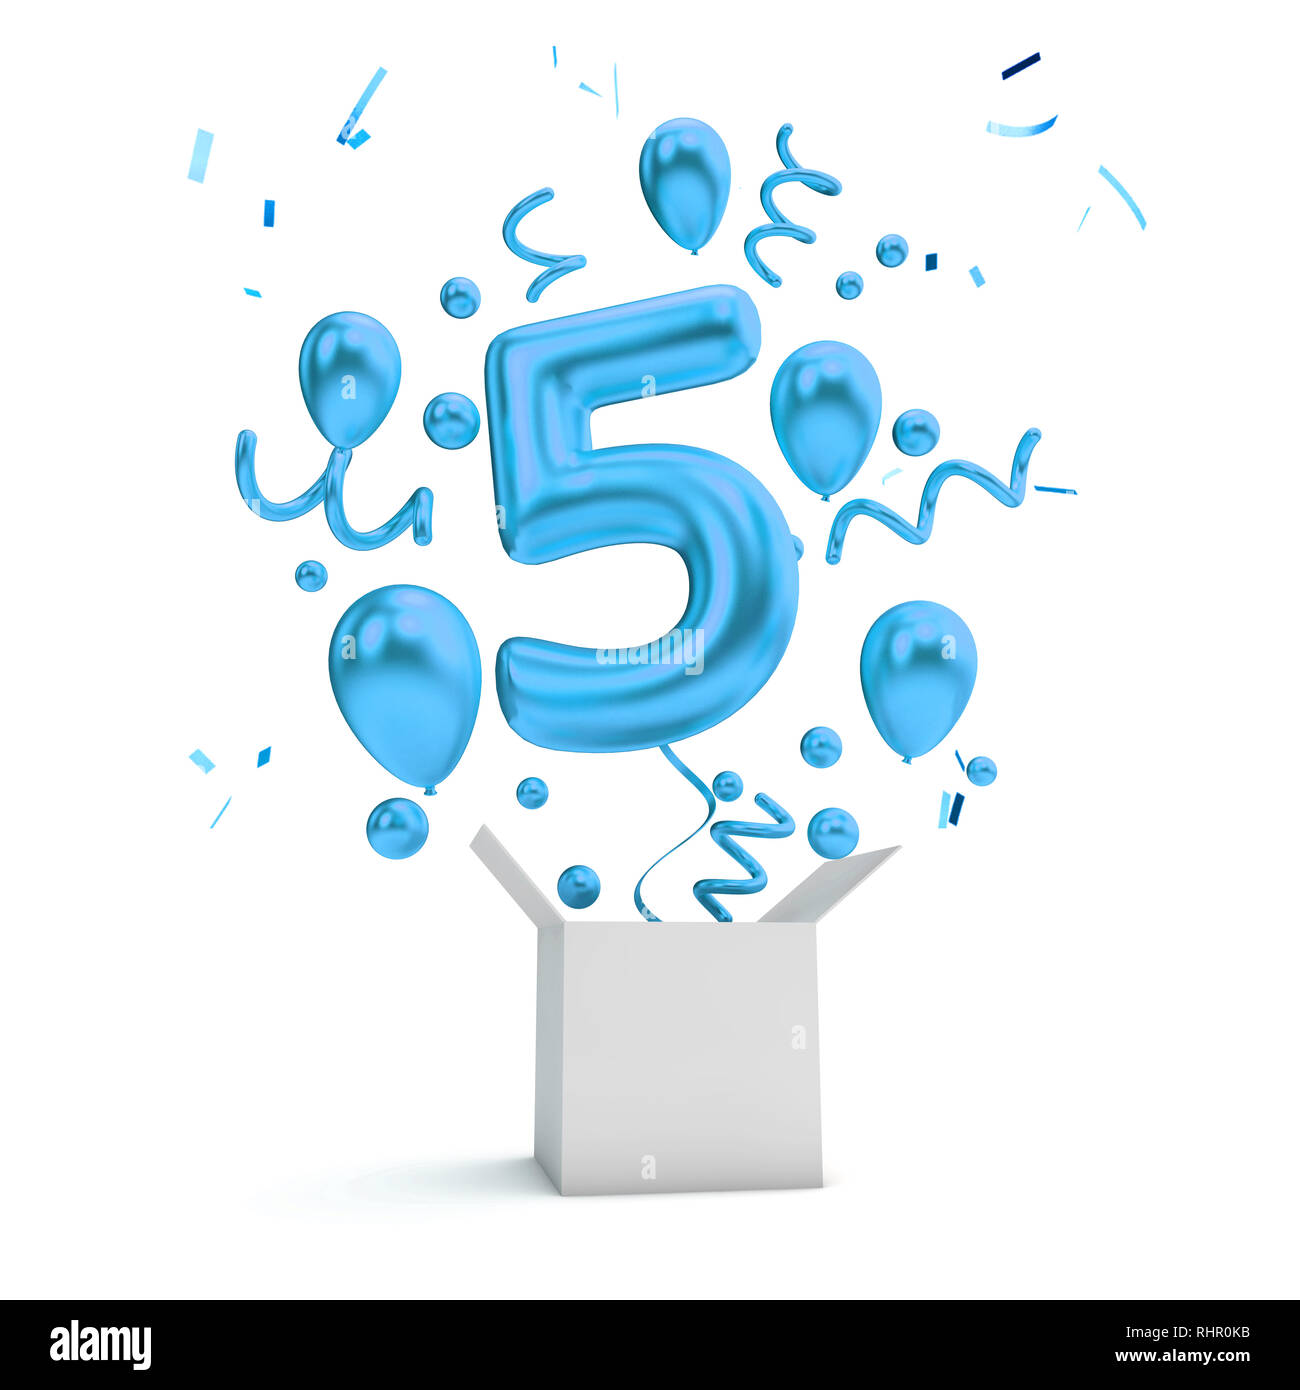 5th birthday Cut Out Stock Images & Pictures - Alamy